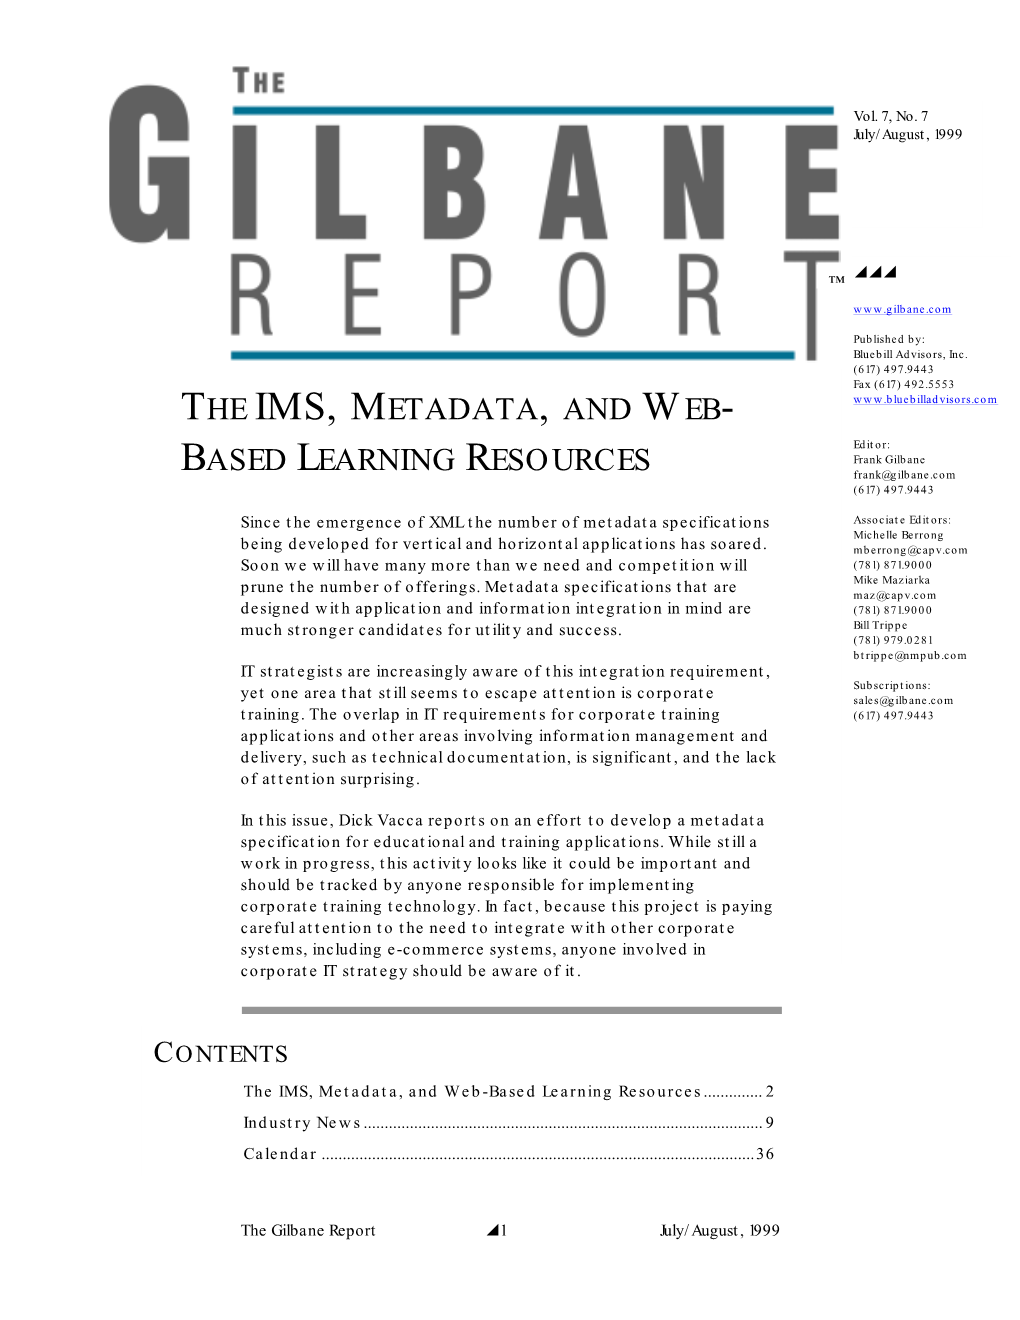 The IMS, Metadata, and Web-Based Learning Resources